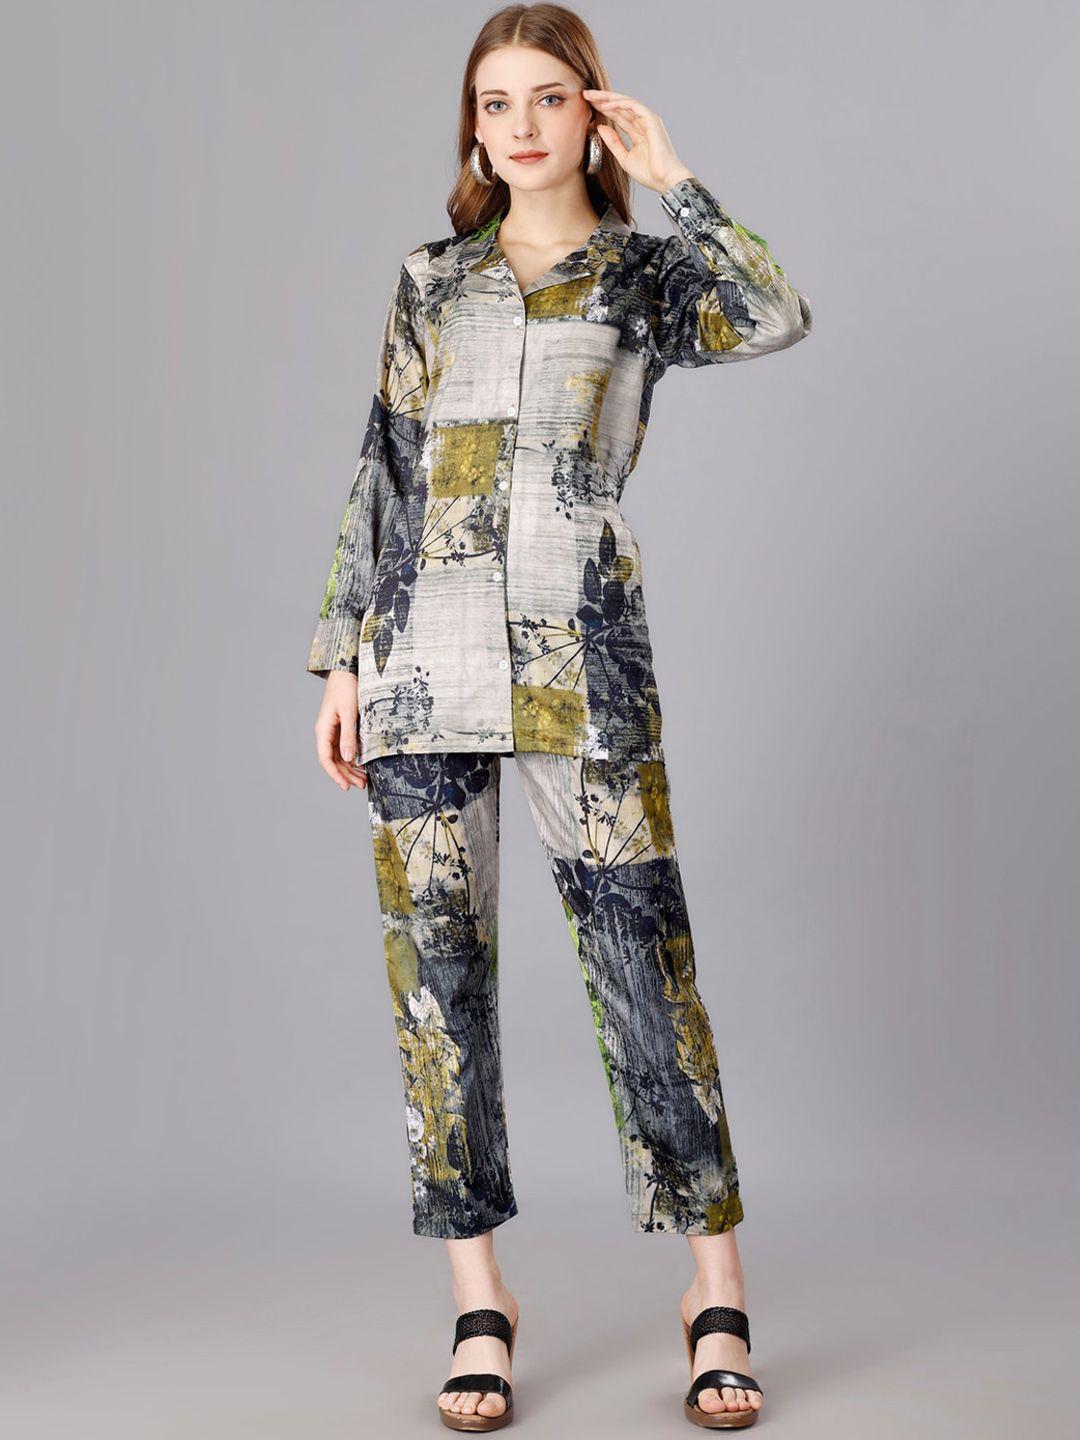 udbhav textile floral printed tunic with trousers